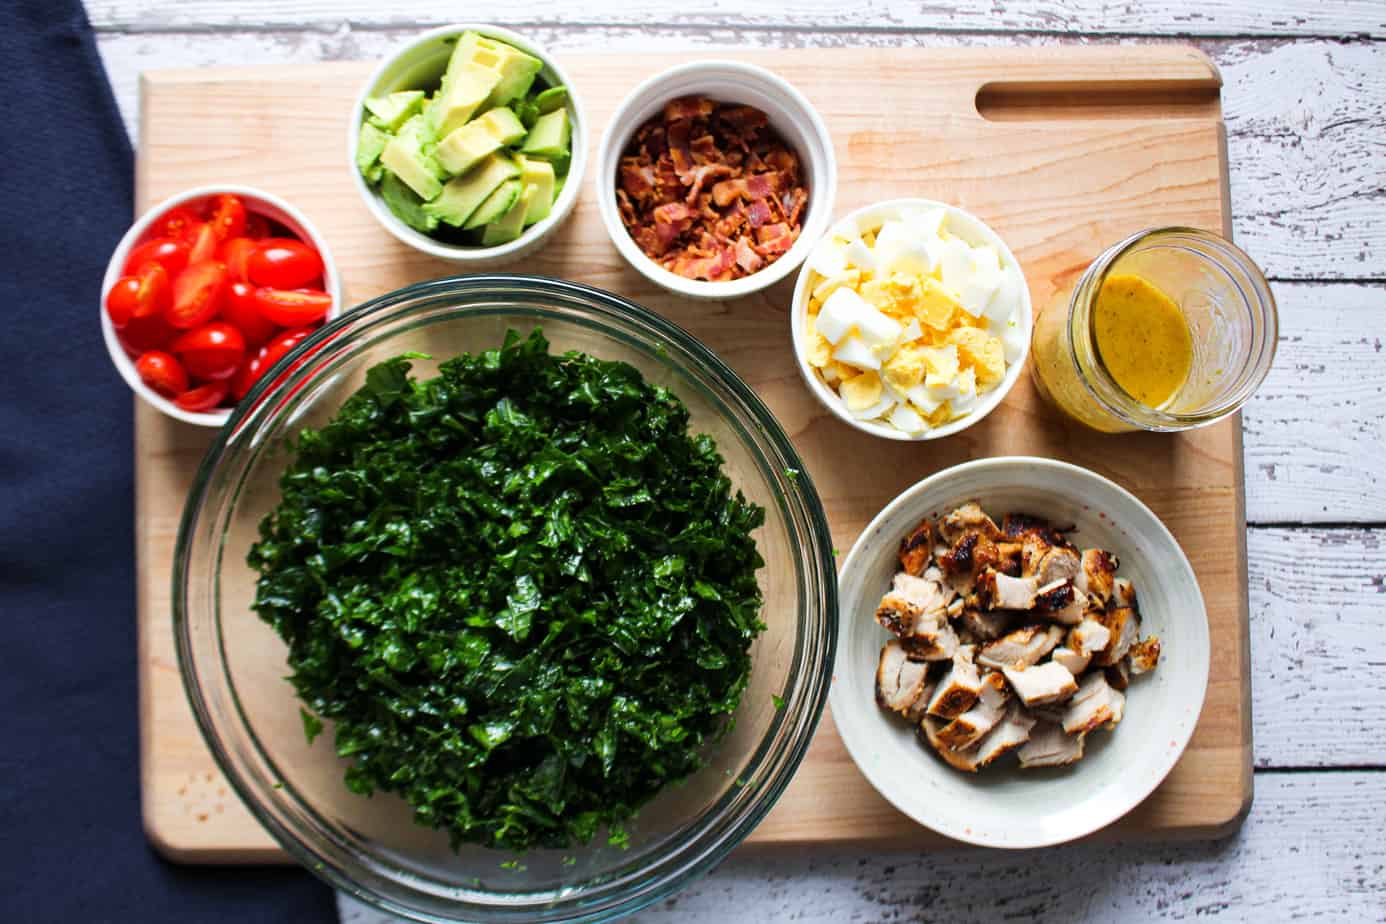 chopped ingredients on cutting board: avocado, bacon, grape tomatoes, kale, cooked chicken, eggs, dressing